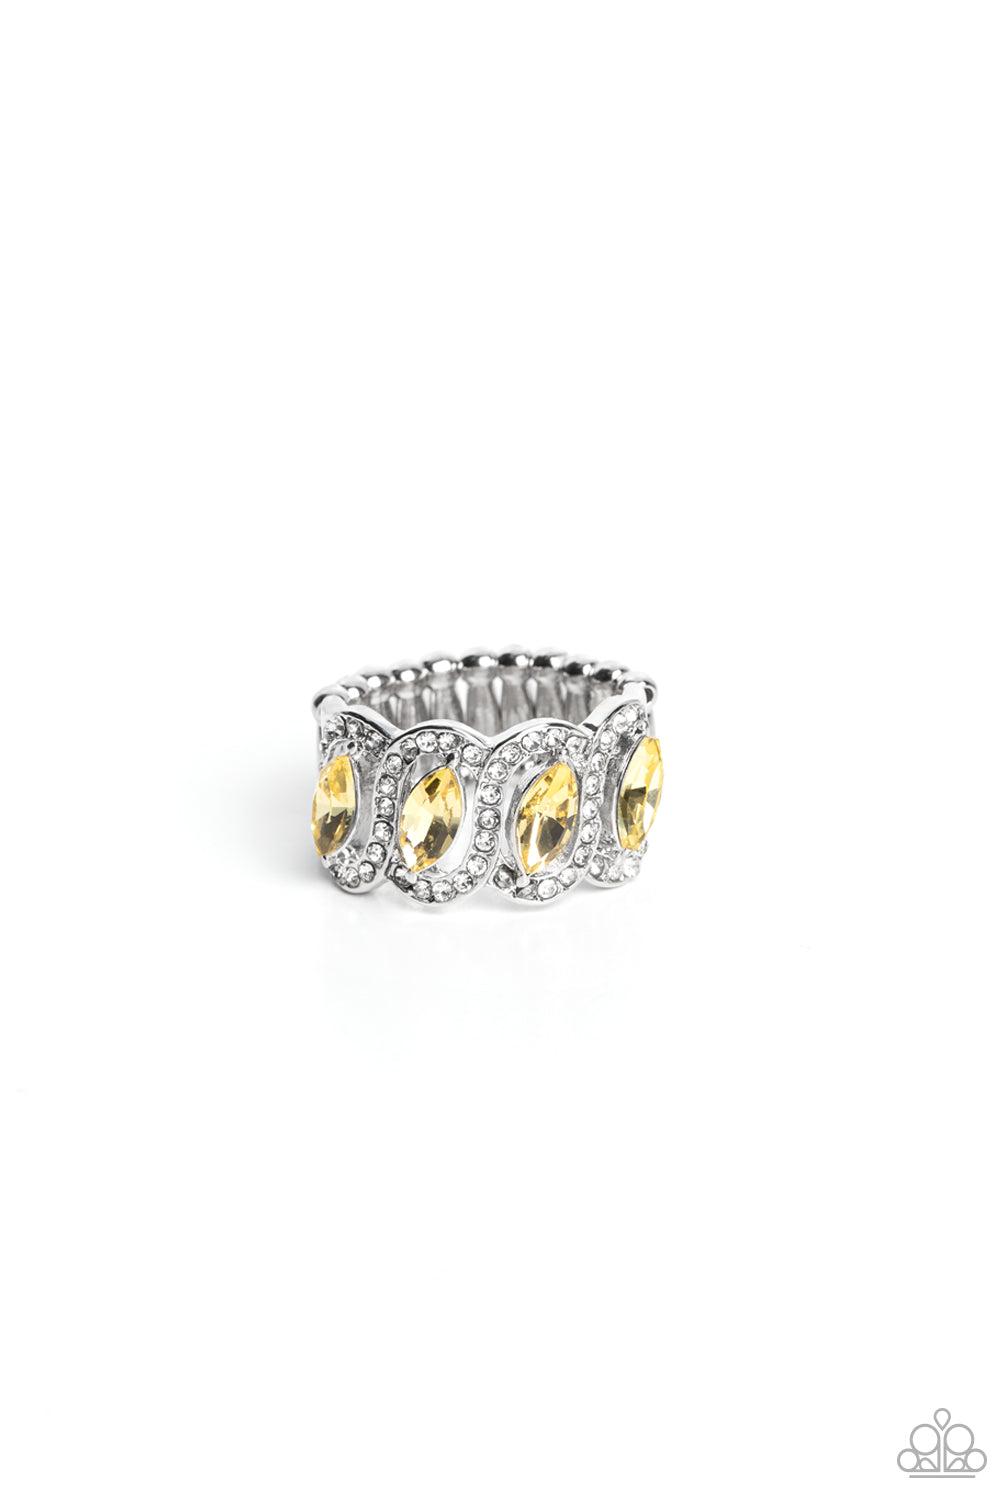 Staggering Sparkle Yellow Rhinestone Ring - Paparazzi Accessories- lightbox - CarasShop.com - $5 Jewelry by Cara Jewels